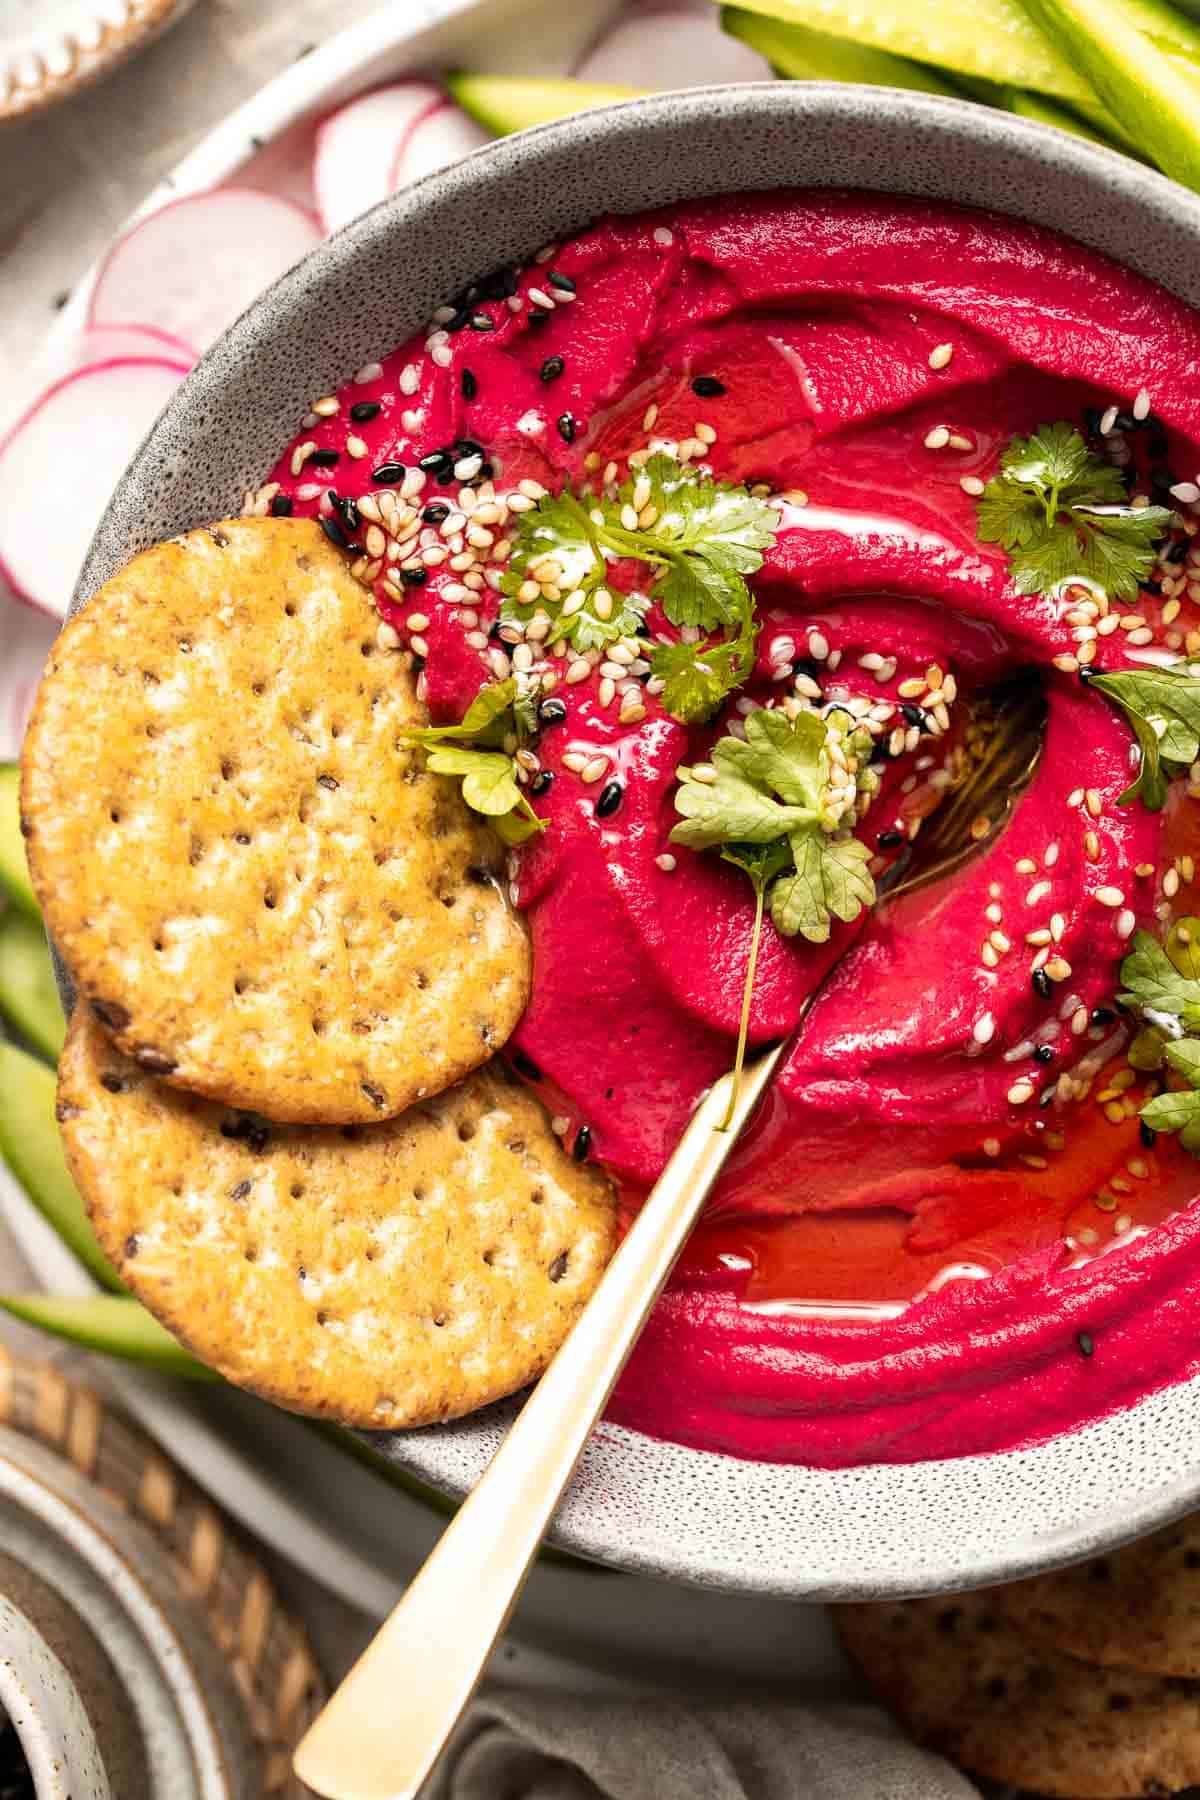 Beet Hummus is a smooth and creamy vegan dip that is made with healthy ingredients including real beets. It's flavorful, delicious, vibrant and colorful. | aheadofthyme.com